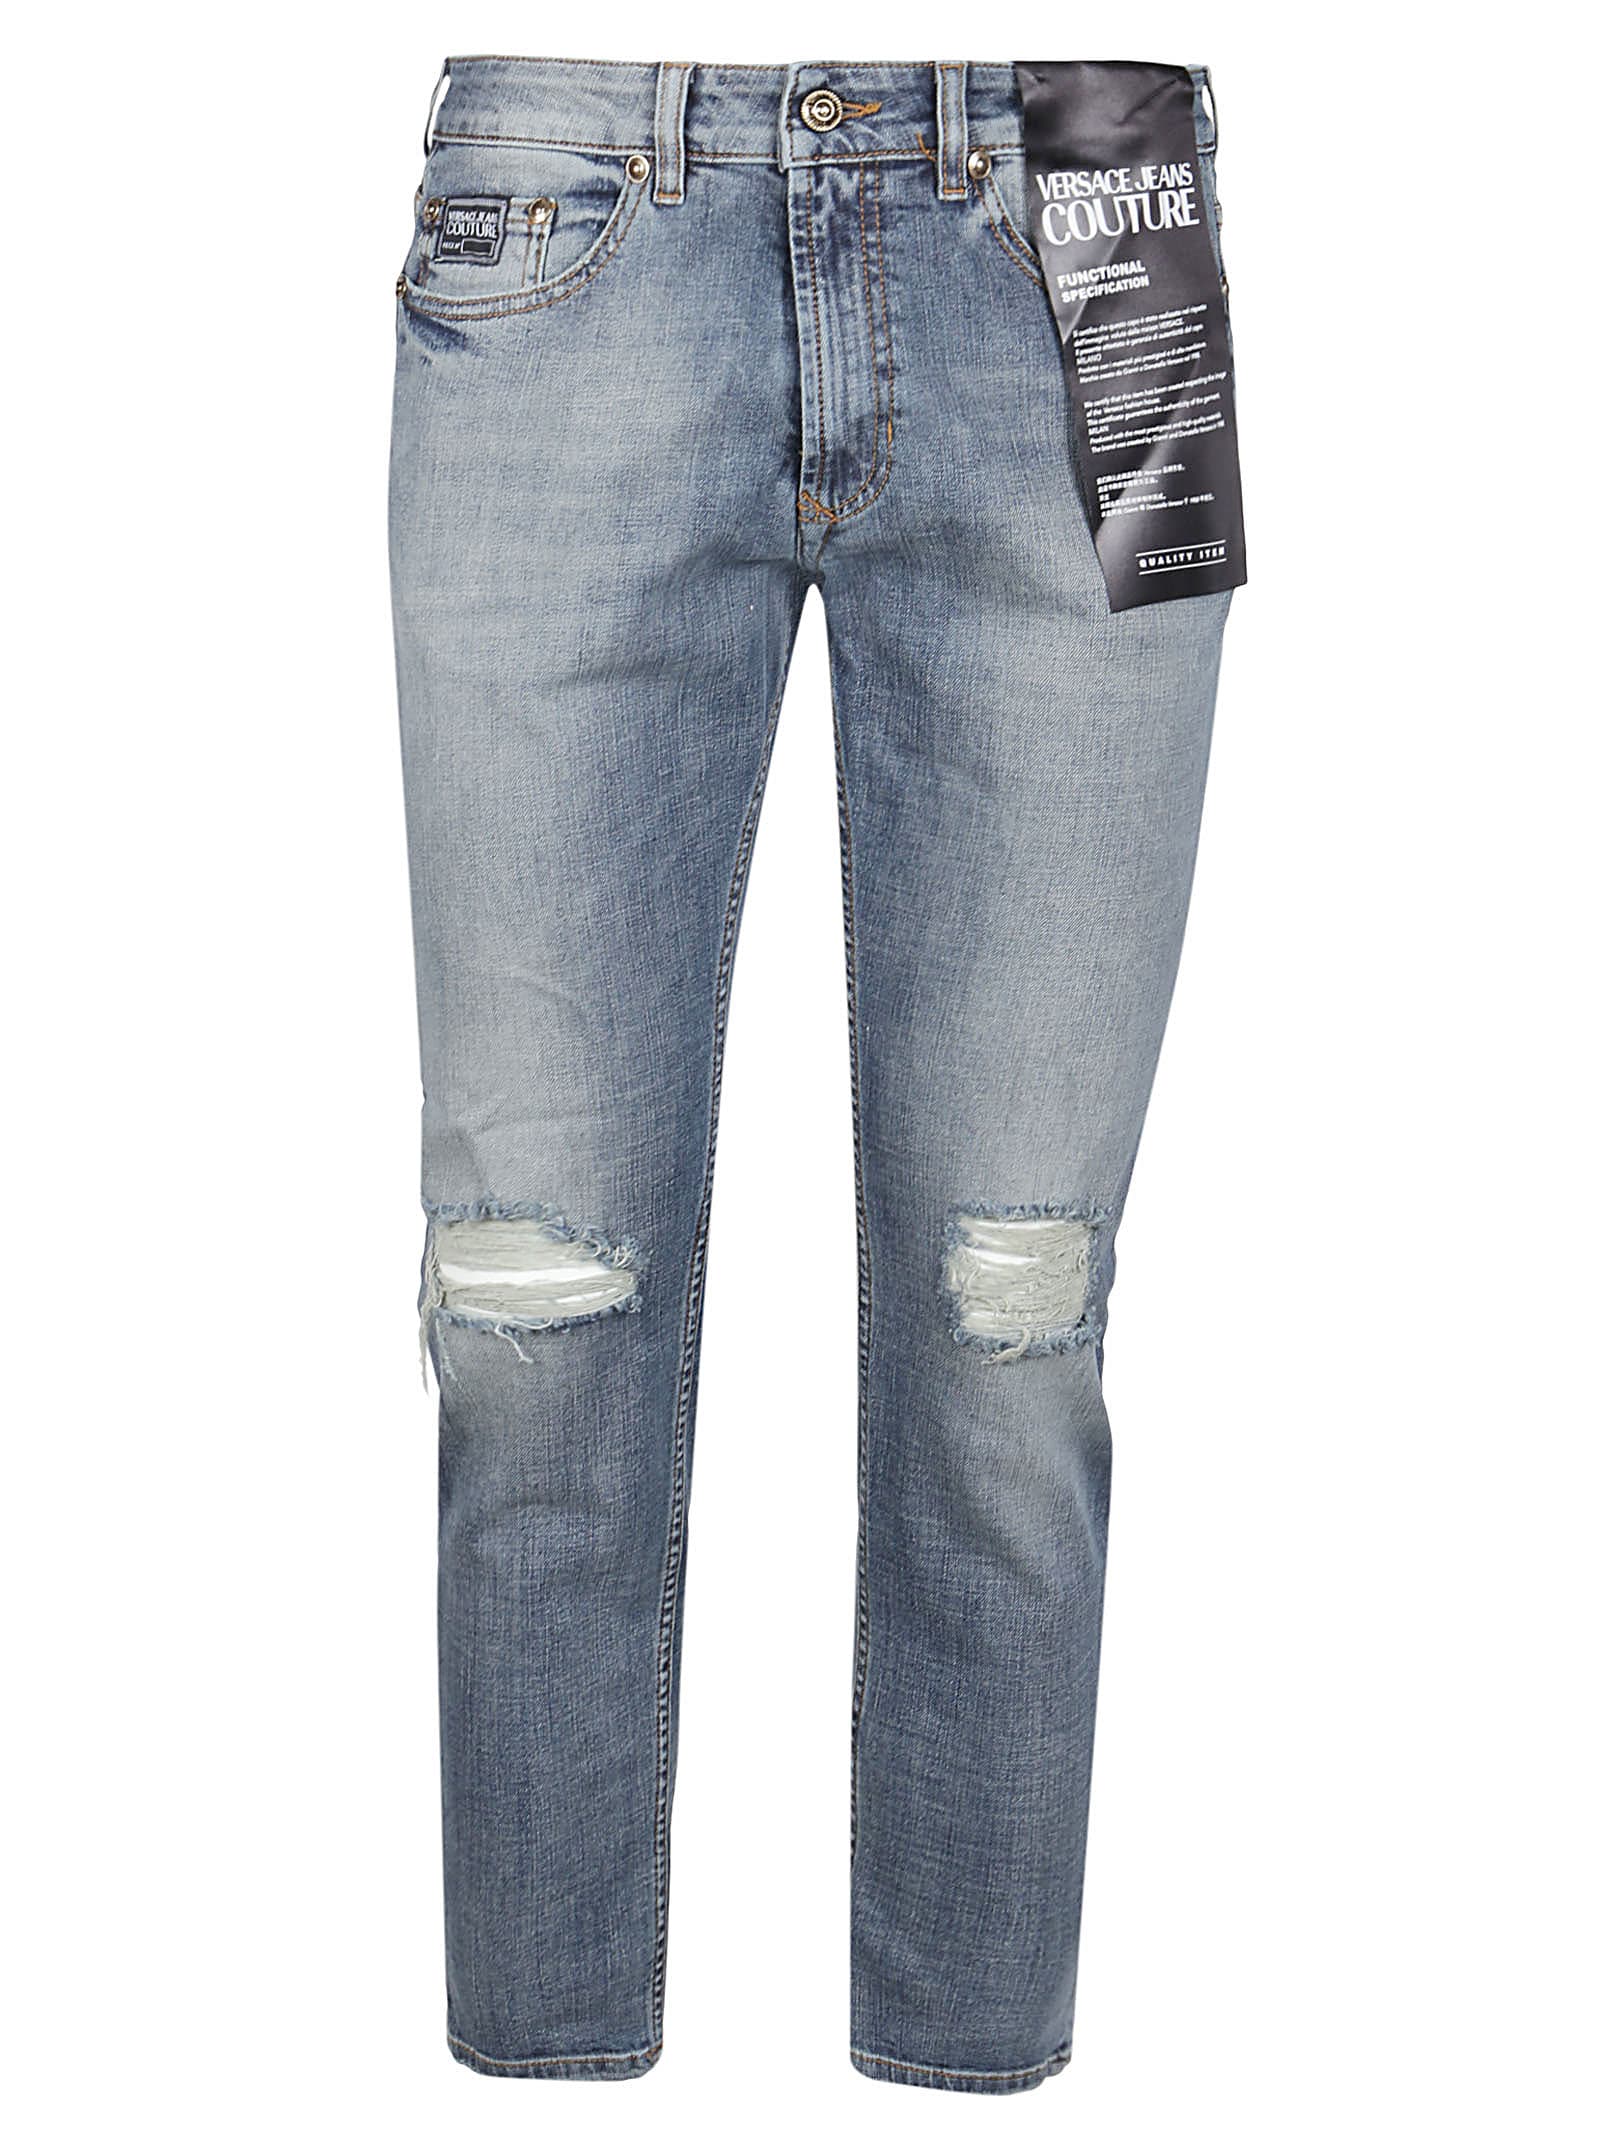 Versace Jeans Couture Skinny 5 Pocket Jeans